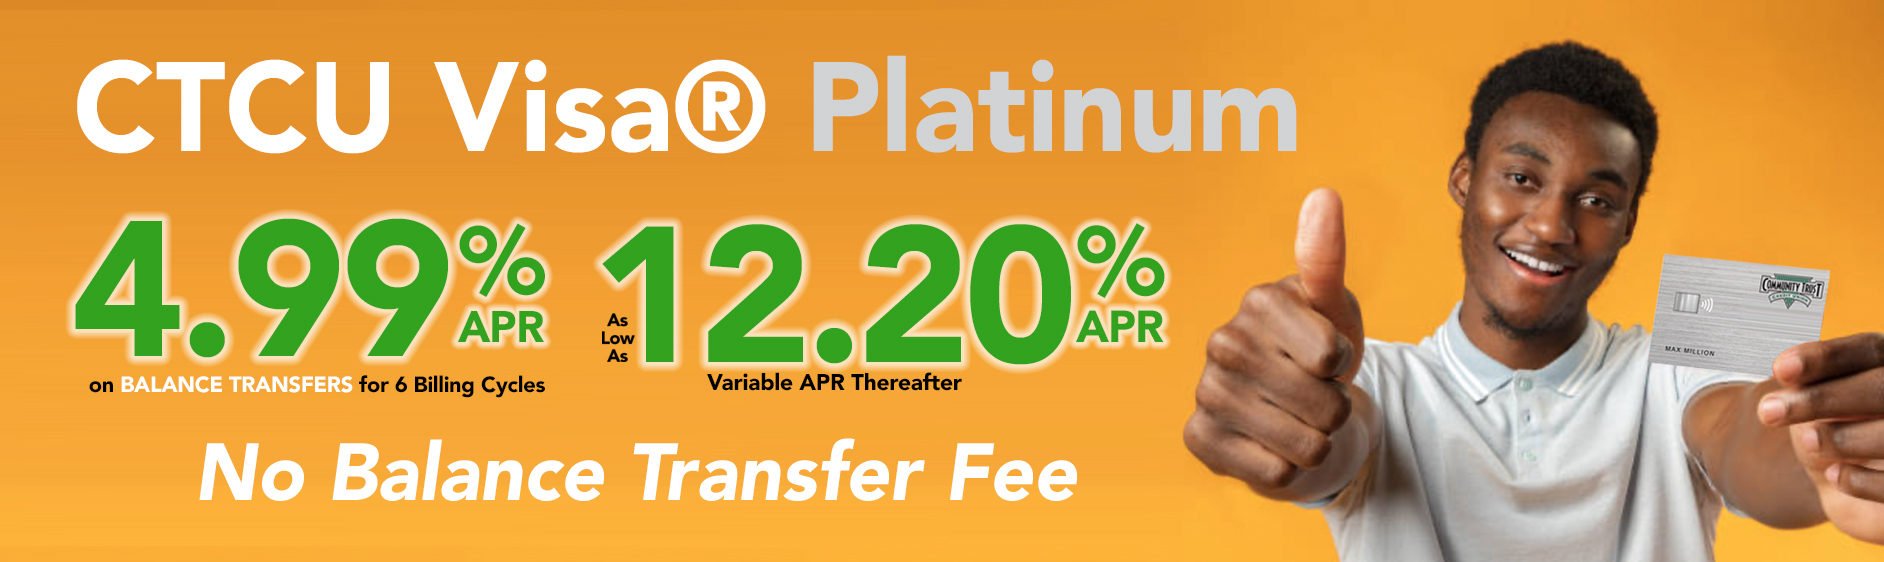 Visa Platinum 0% APR on purchases first 6 months